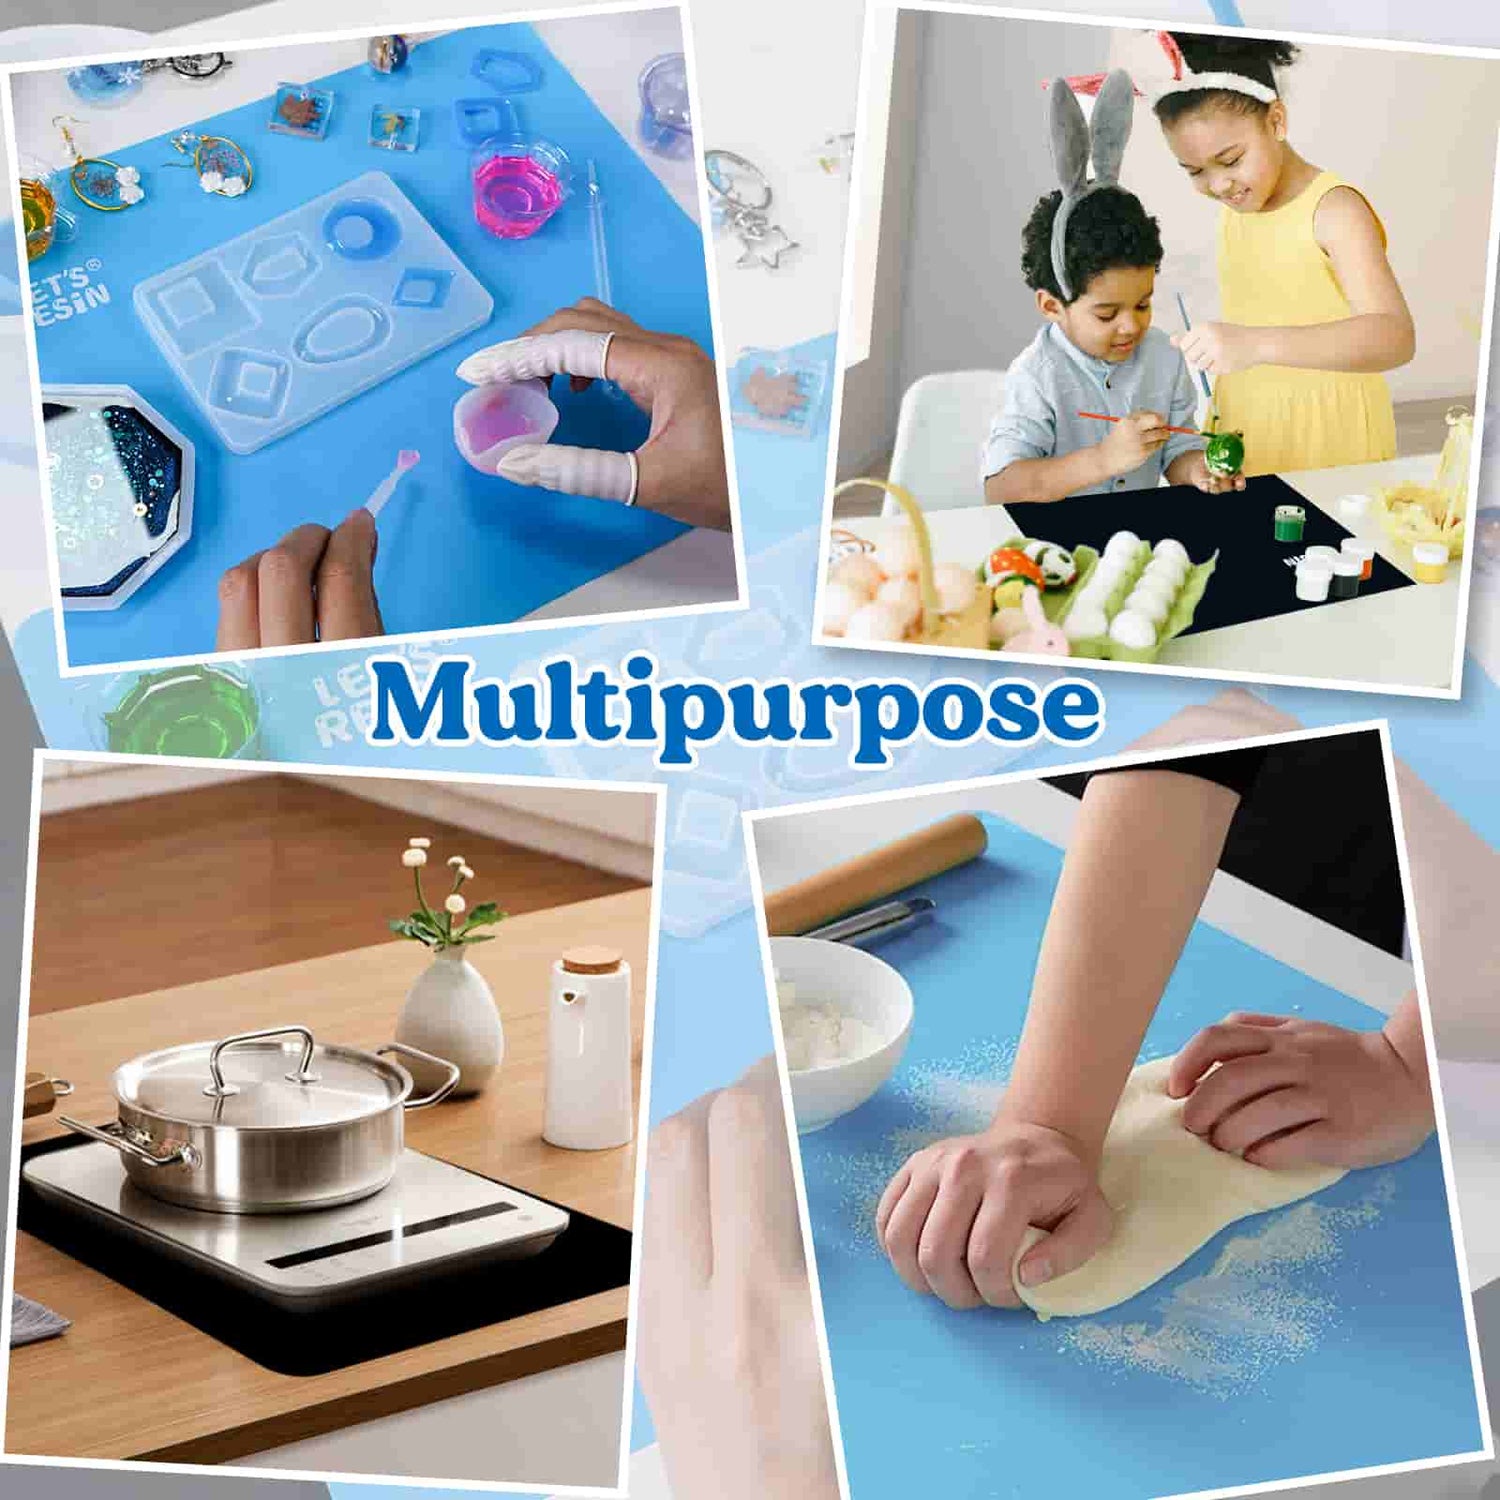 Silicone Craft Mat Silicone Mat for Resin Casting Painting Art